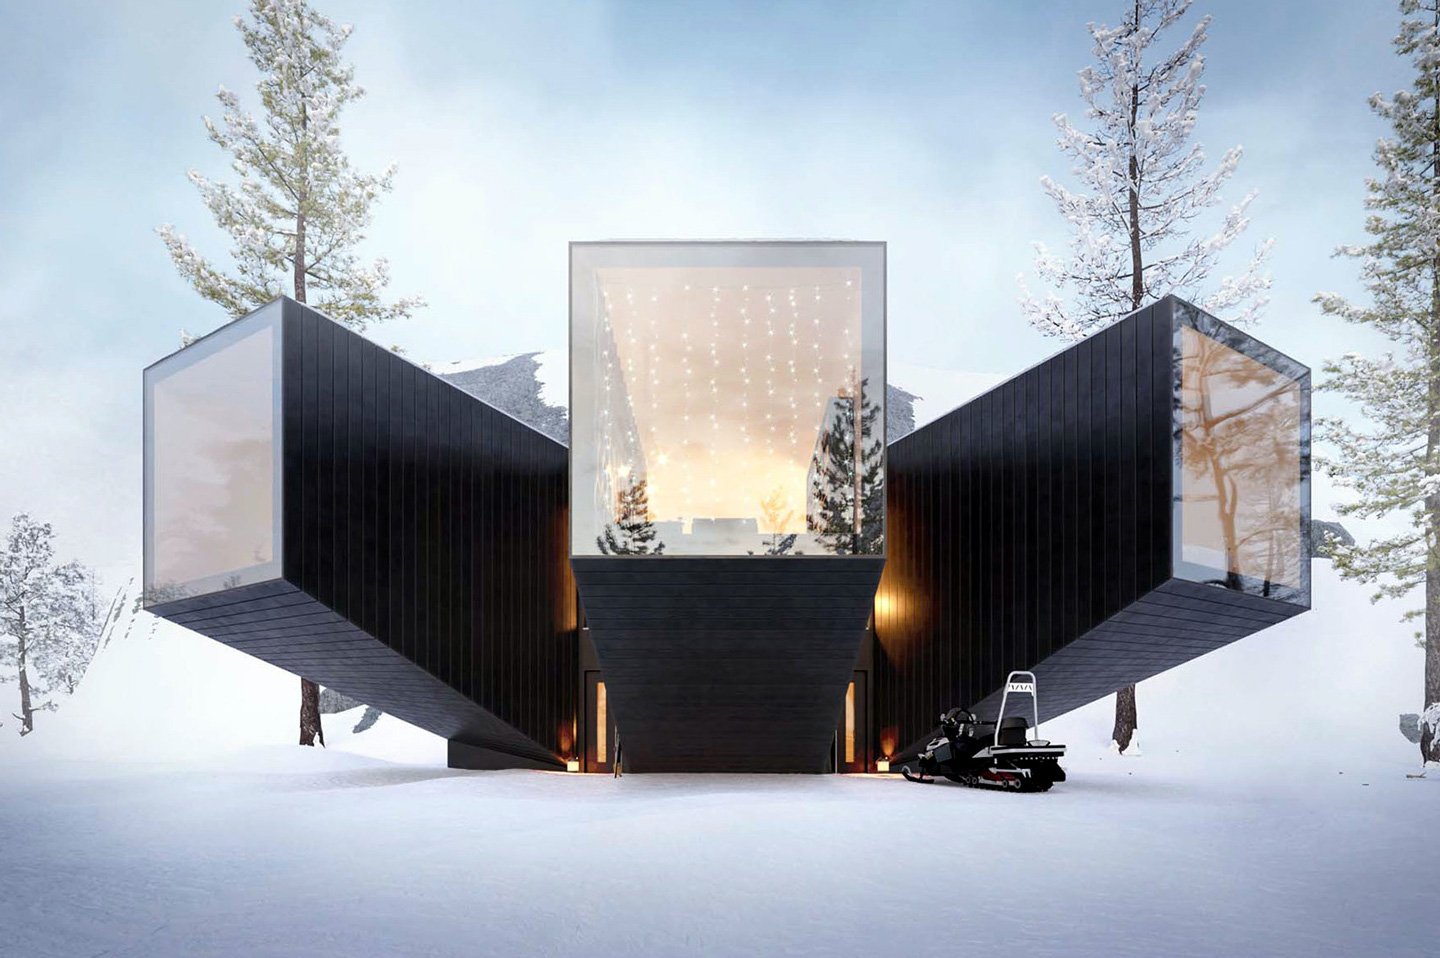 This secluded alpine home comes with three distinct pod-shaped living spaces